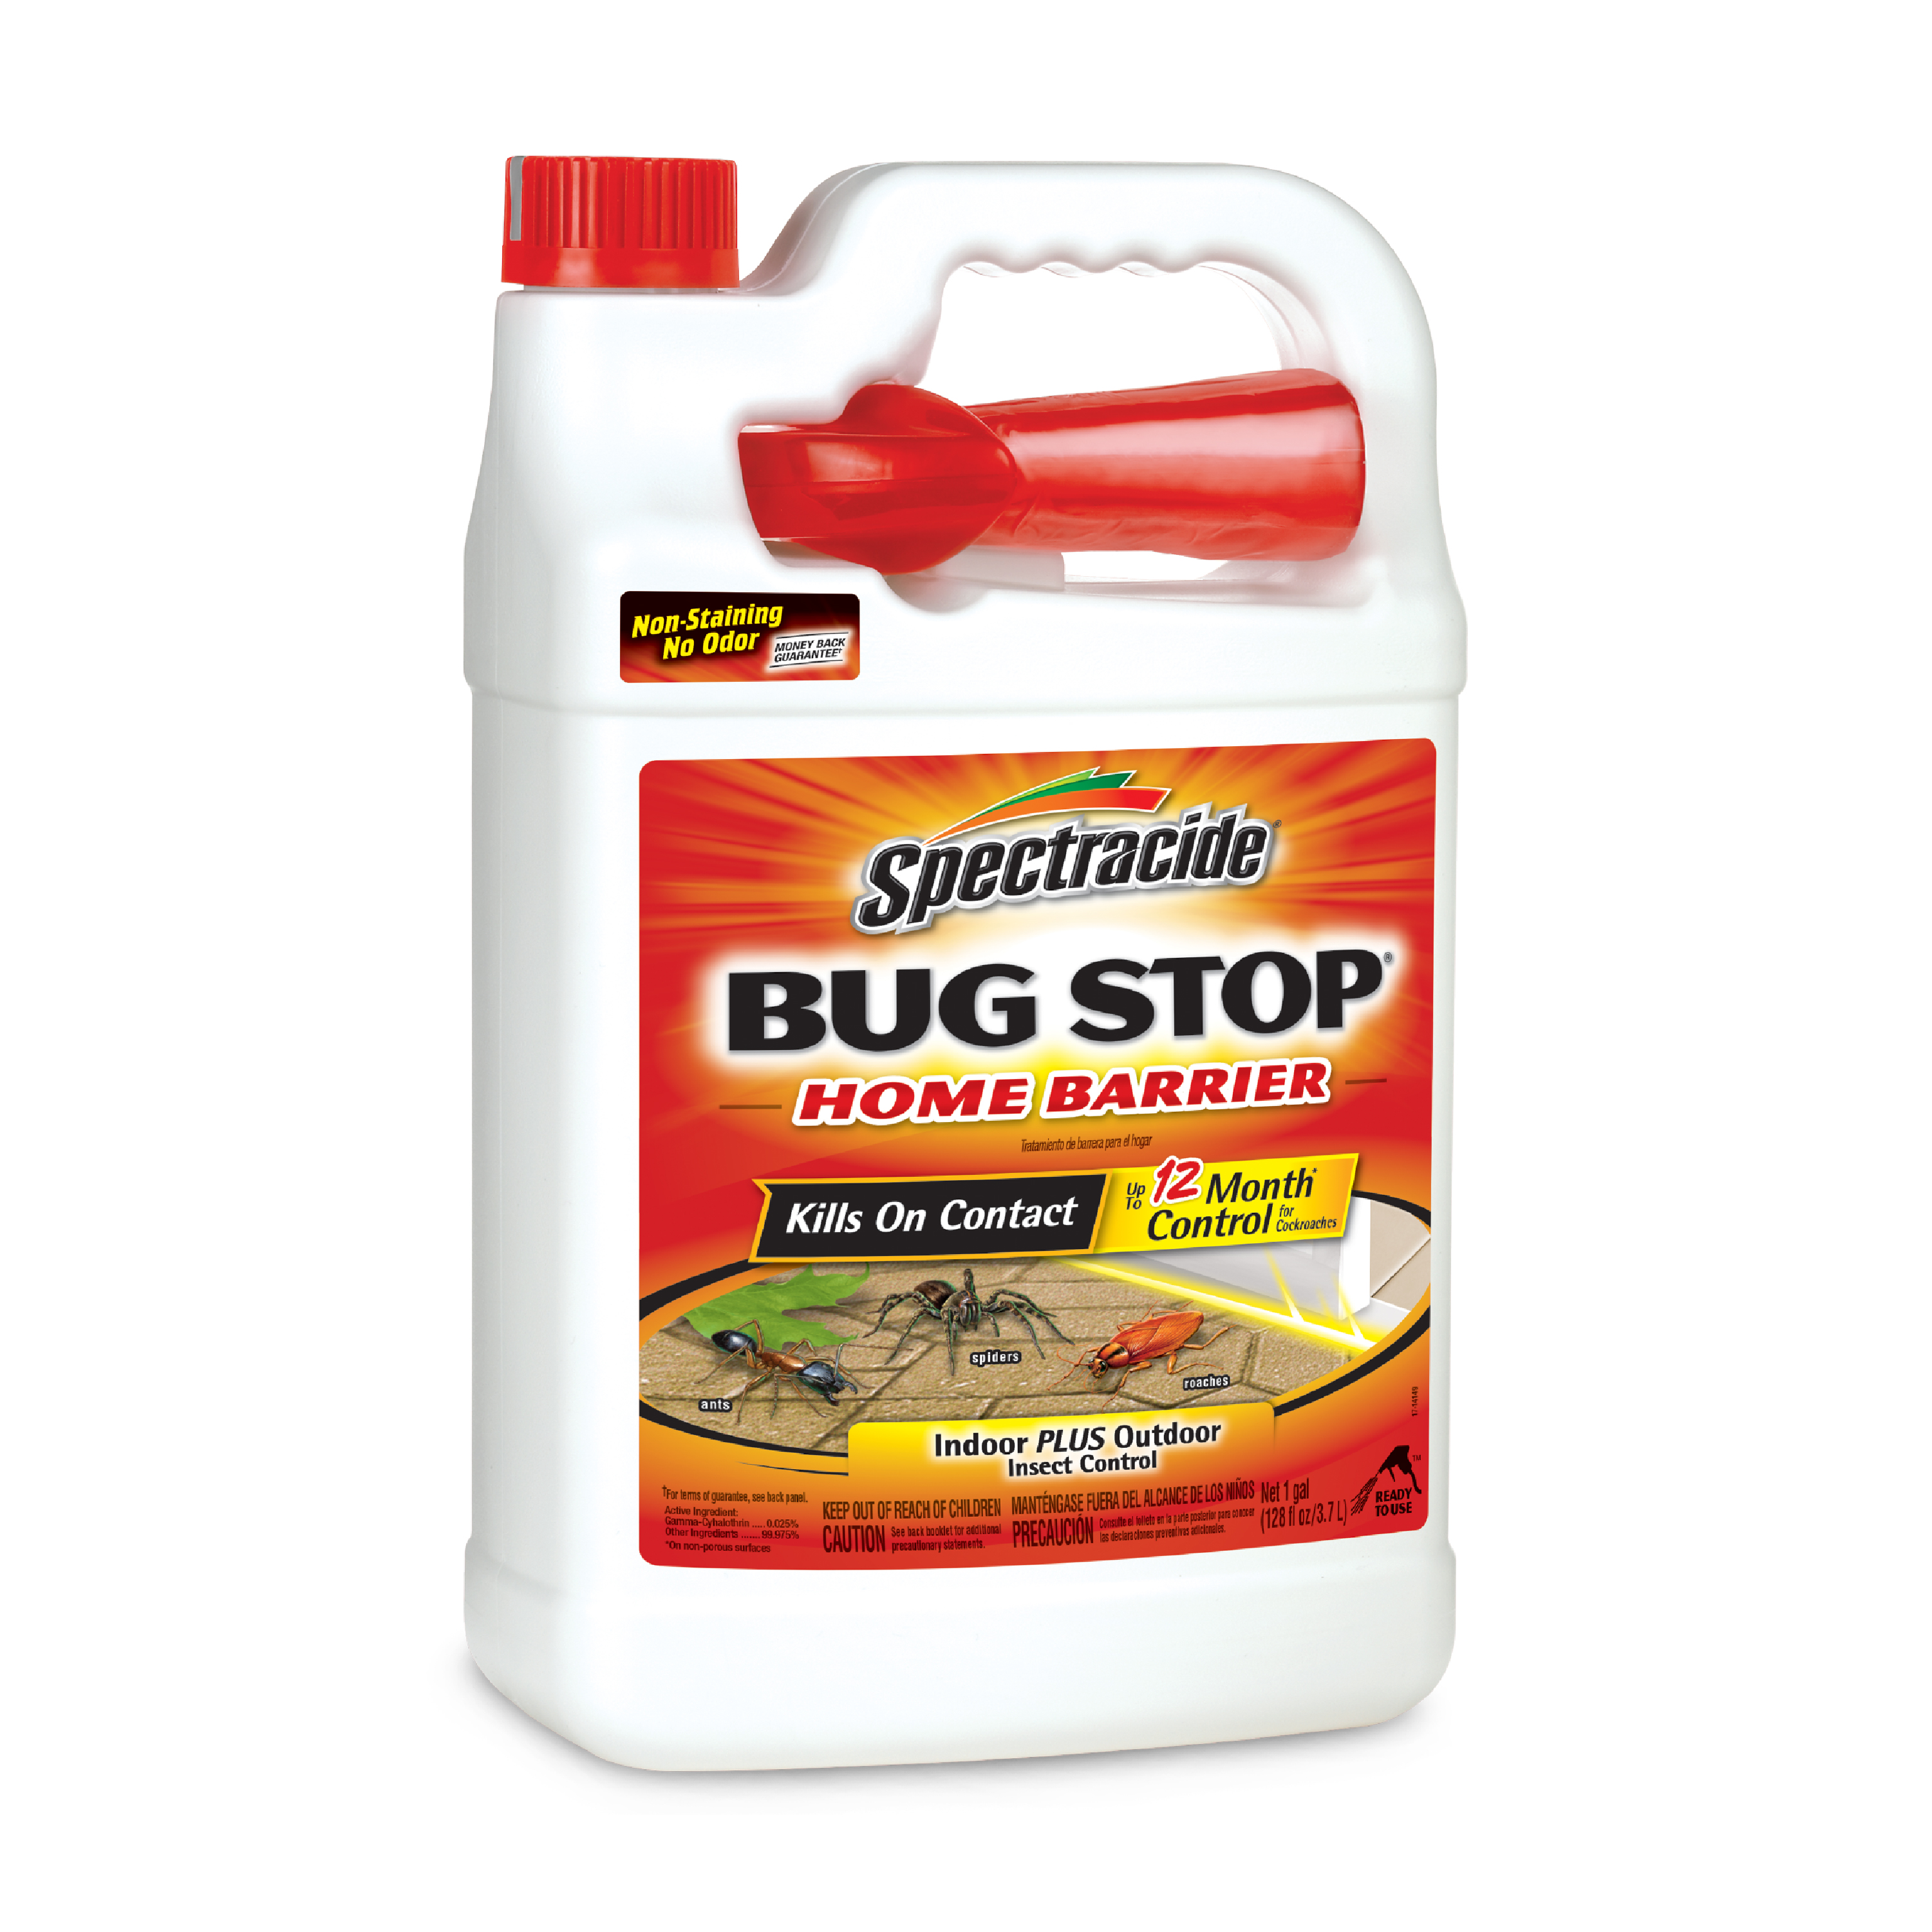 Spectracide Bug Stop Home Barrier Spray, Kills Ants, Roaches & Spiders Insect Control, 1 Gallon - image 4 of 11